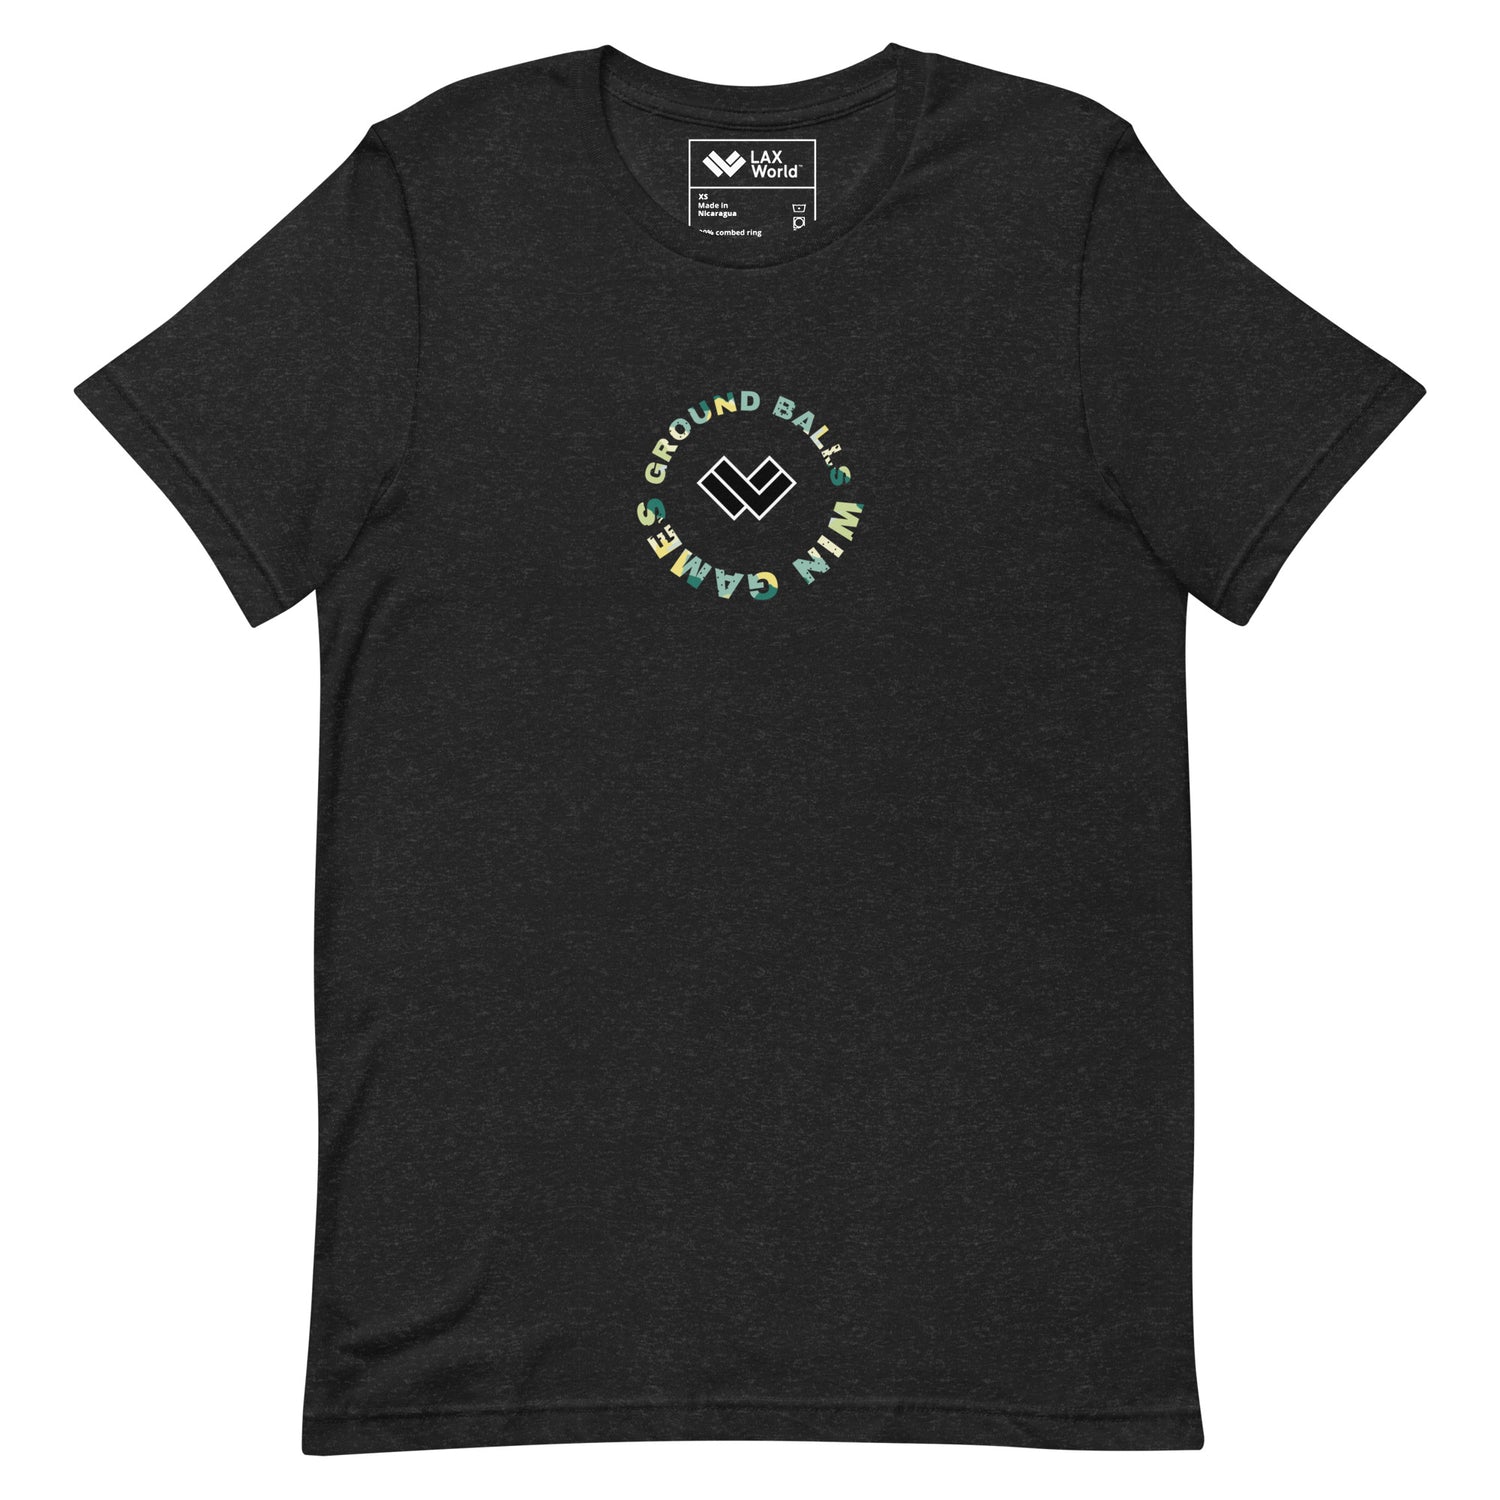 LAX World - ‘Ground Balls Win Games” Multicolor Unisex Lacrosse T Shirt- Front 